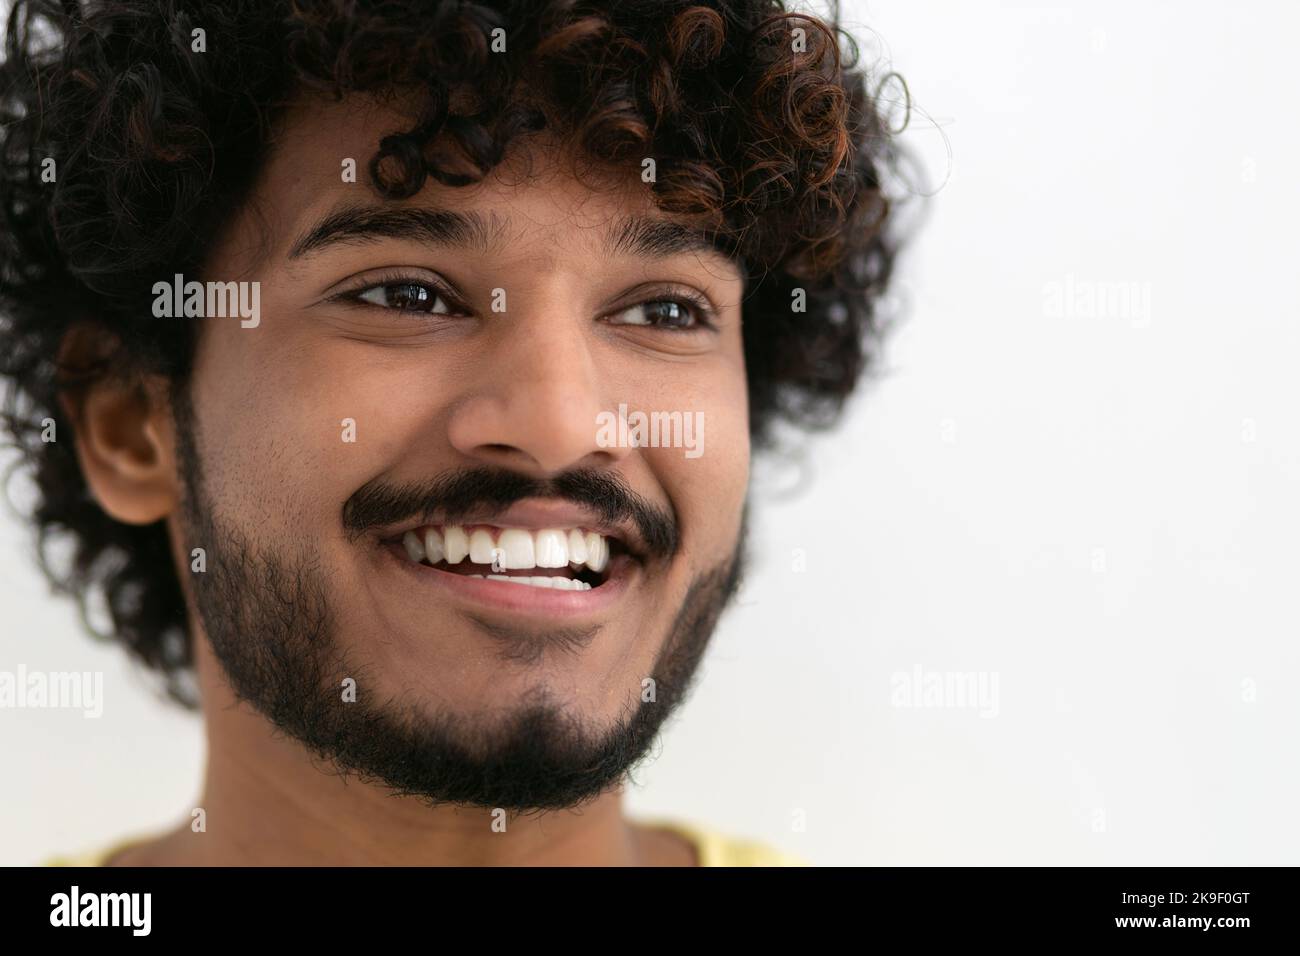 Portrait young happy positive Indian man with white teeth and curly hair smiling broadly on white background Stock Photo